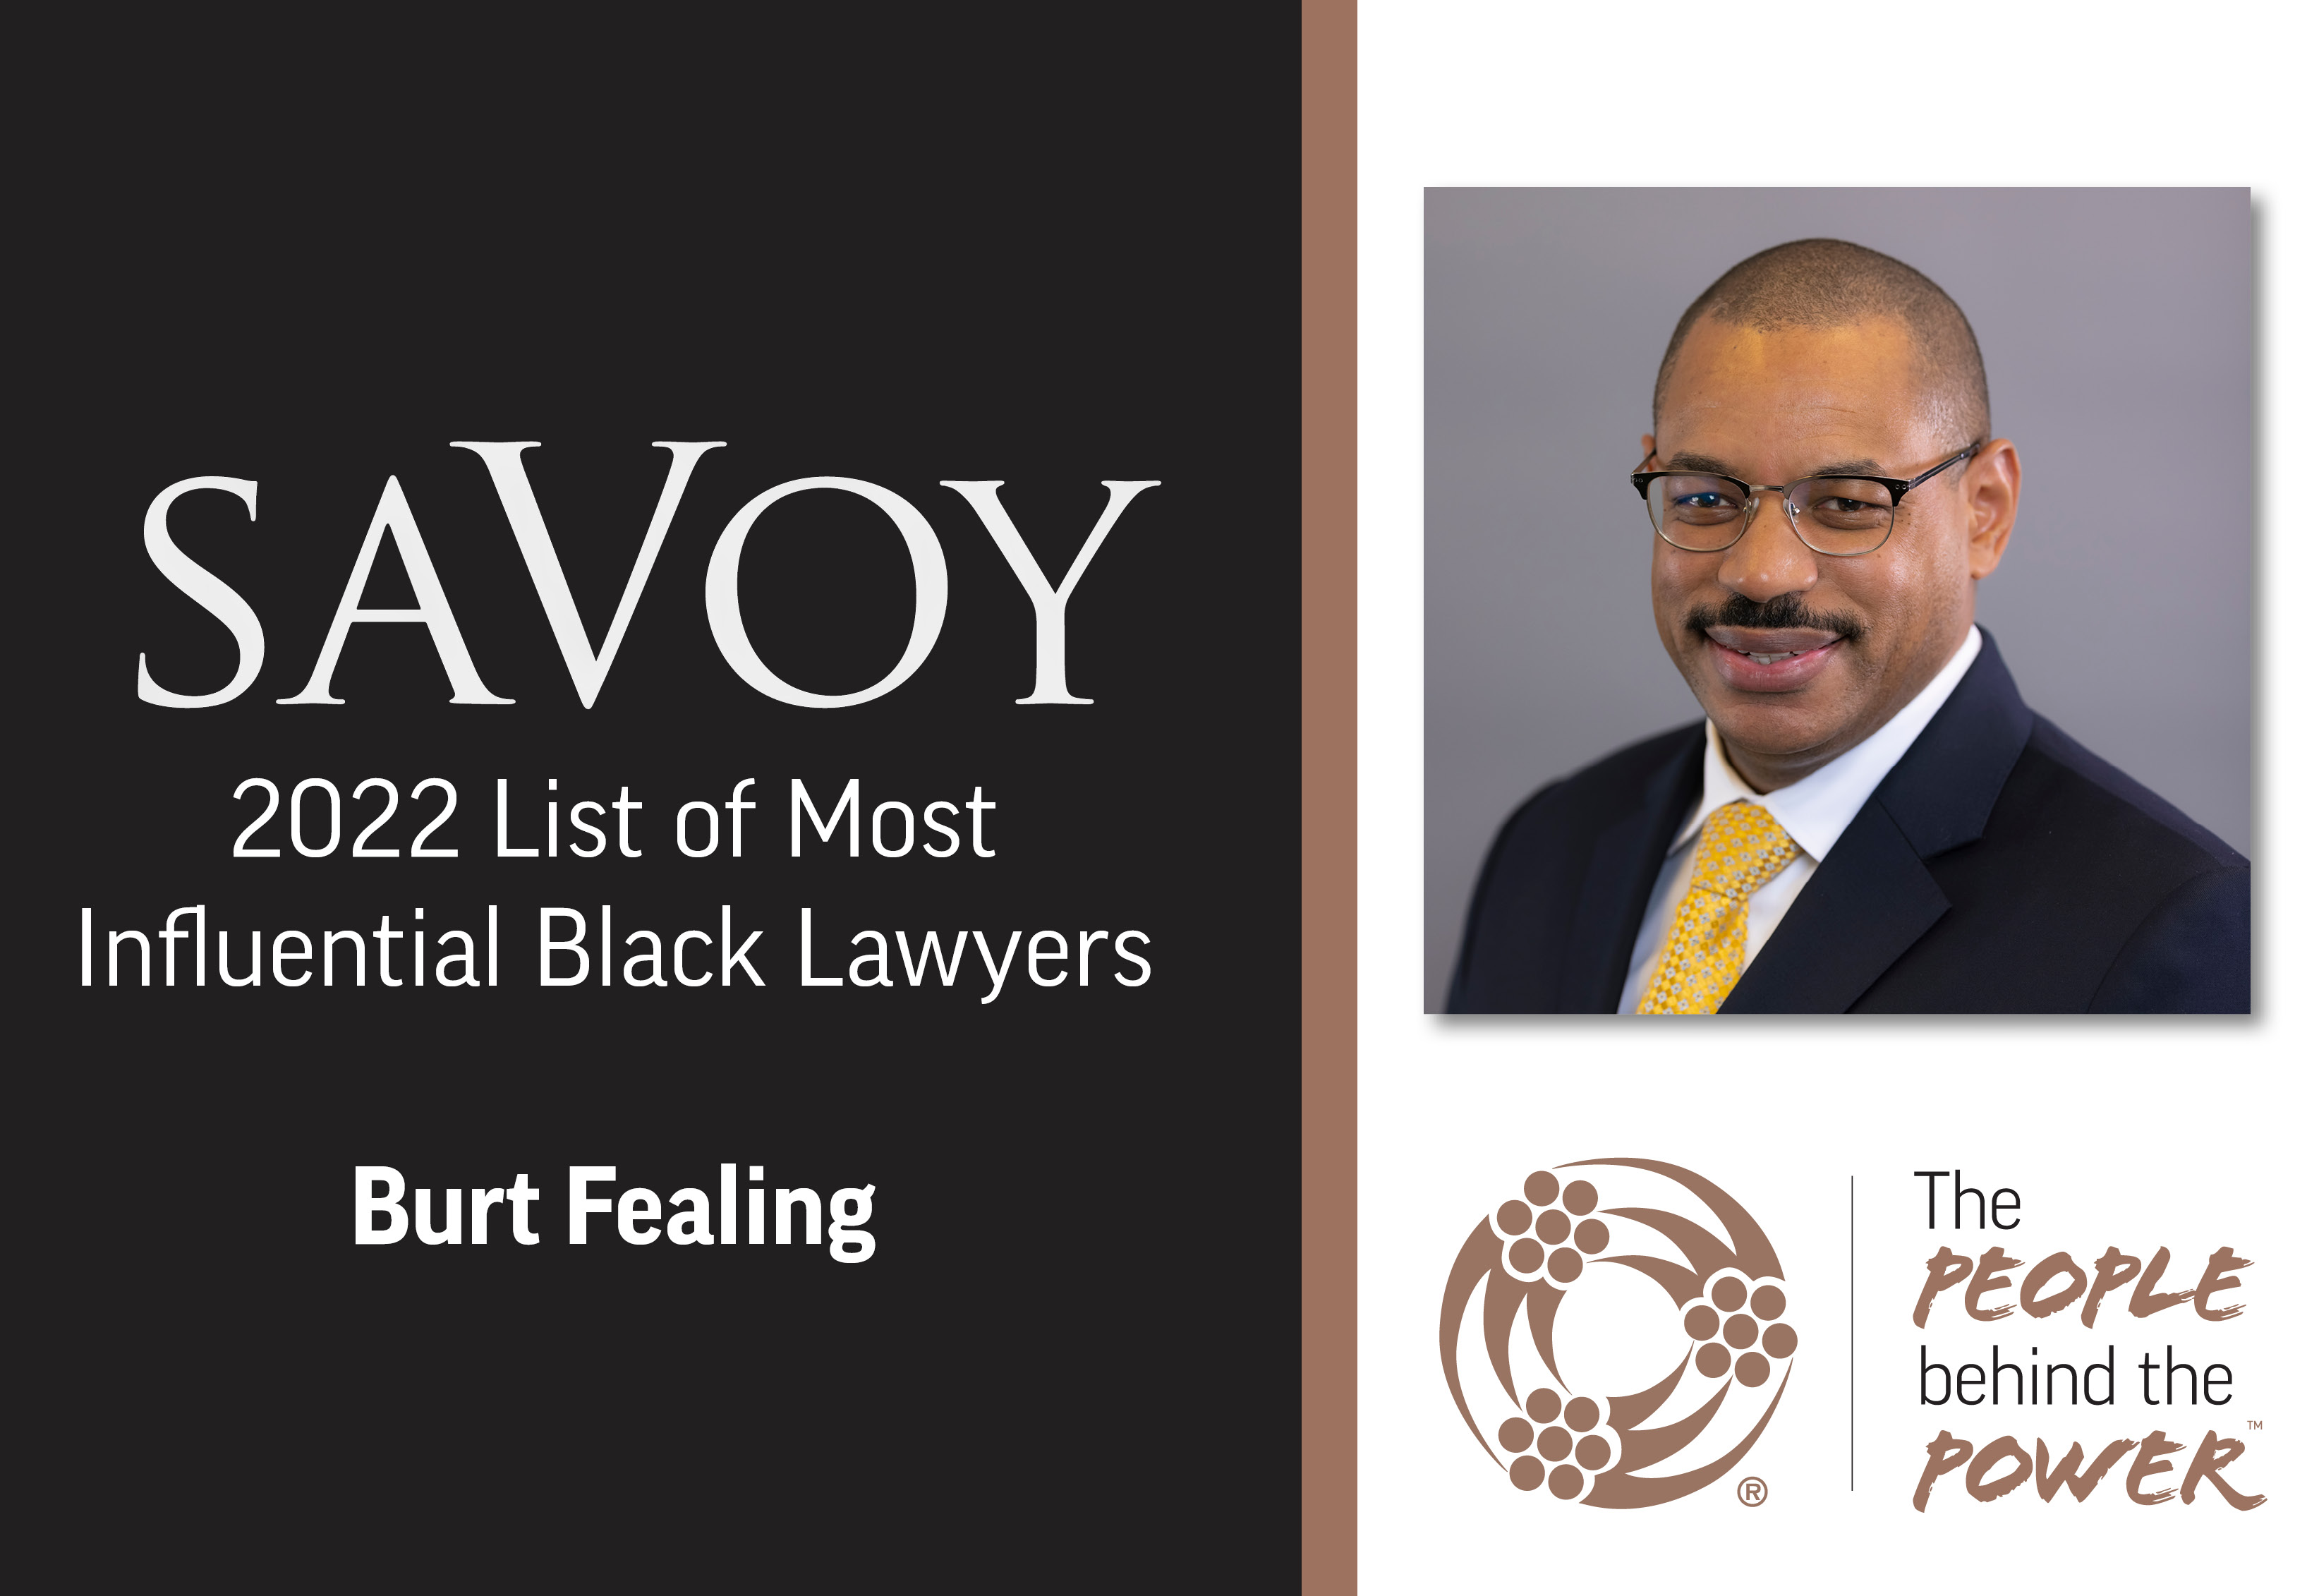 Southwire’s Burt Fealing Named to 2022 List of Most Influential Black Lawyers